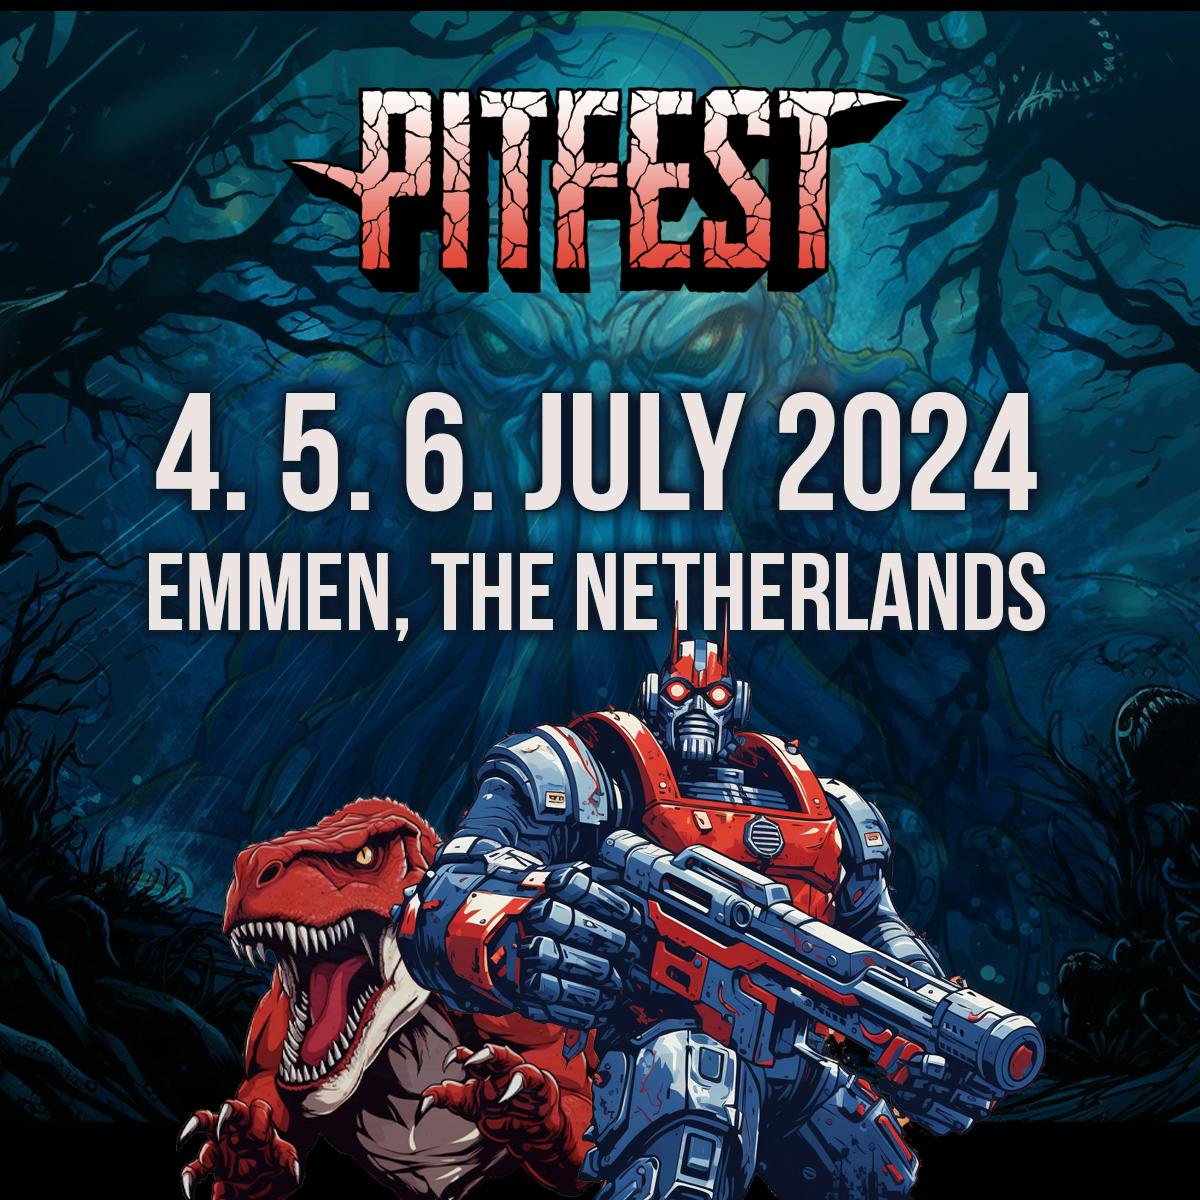 Pitfest 2024 tickets